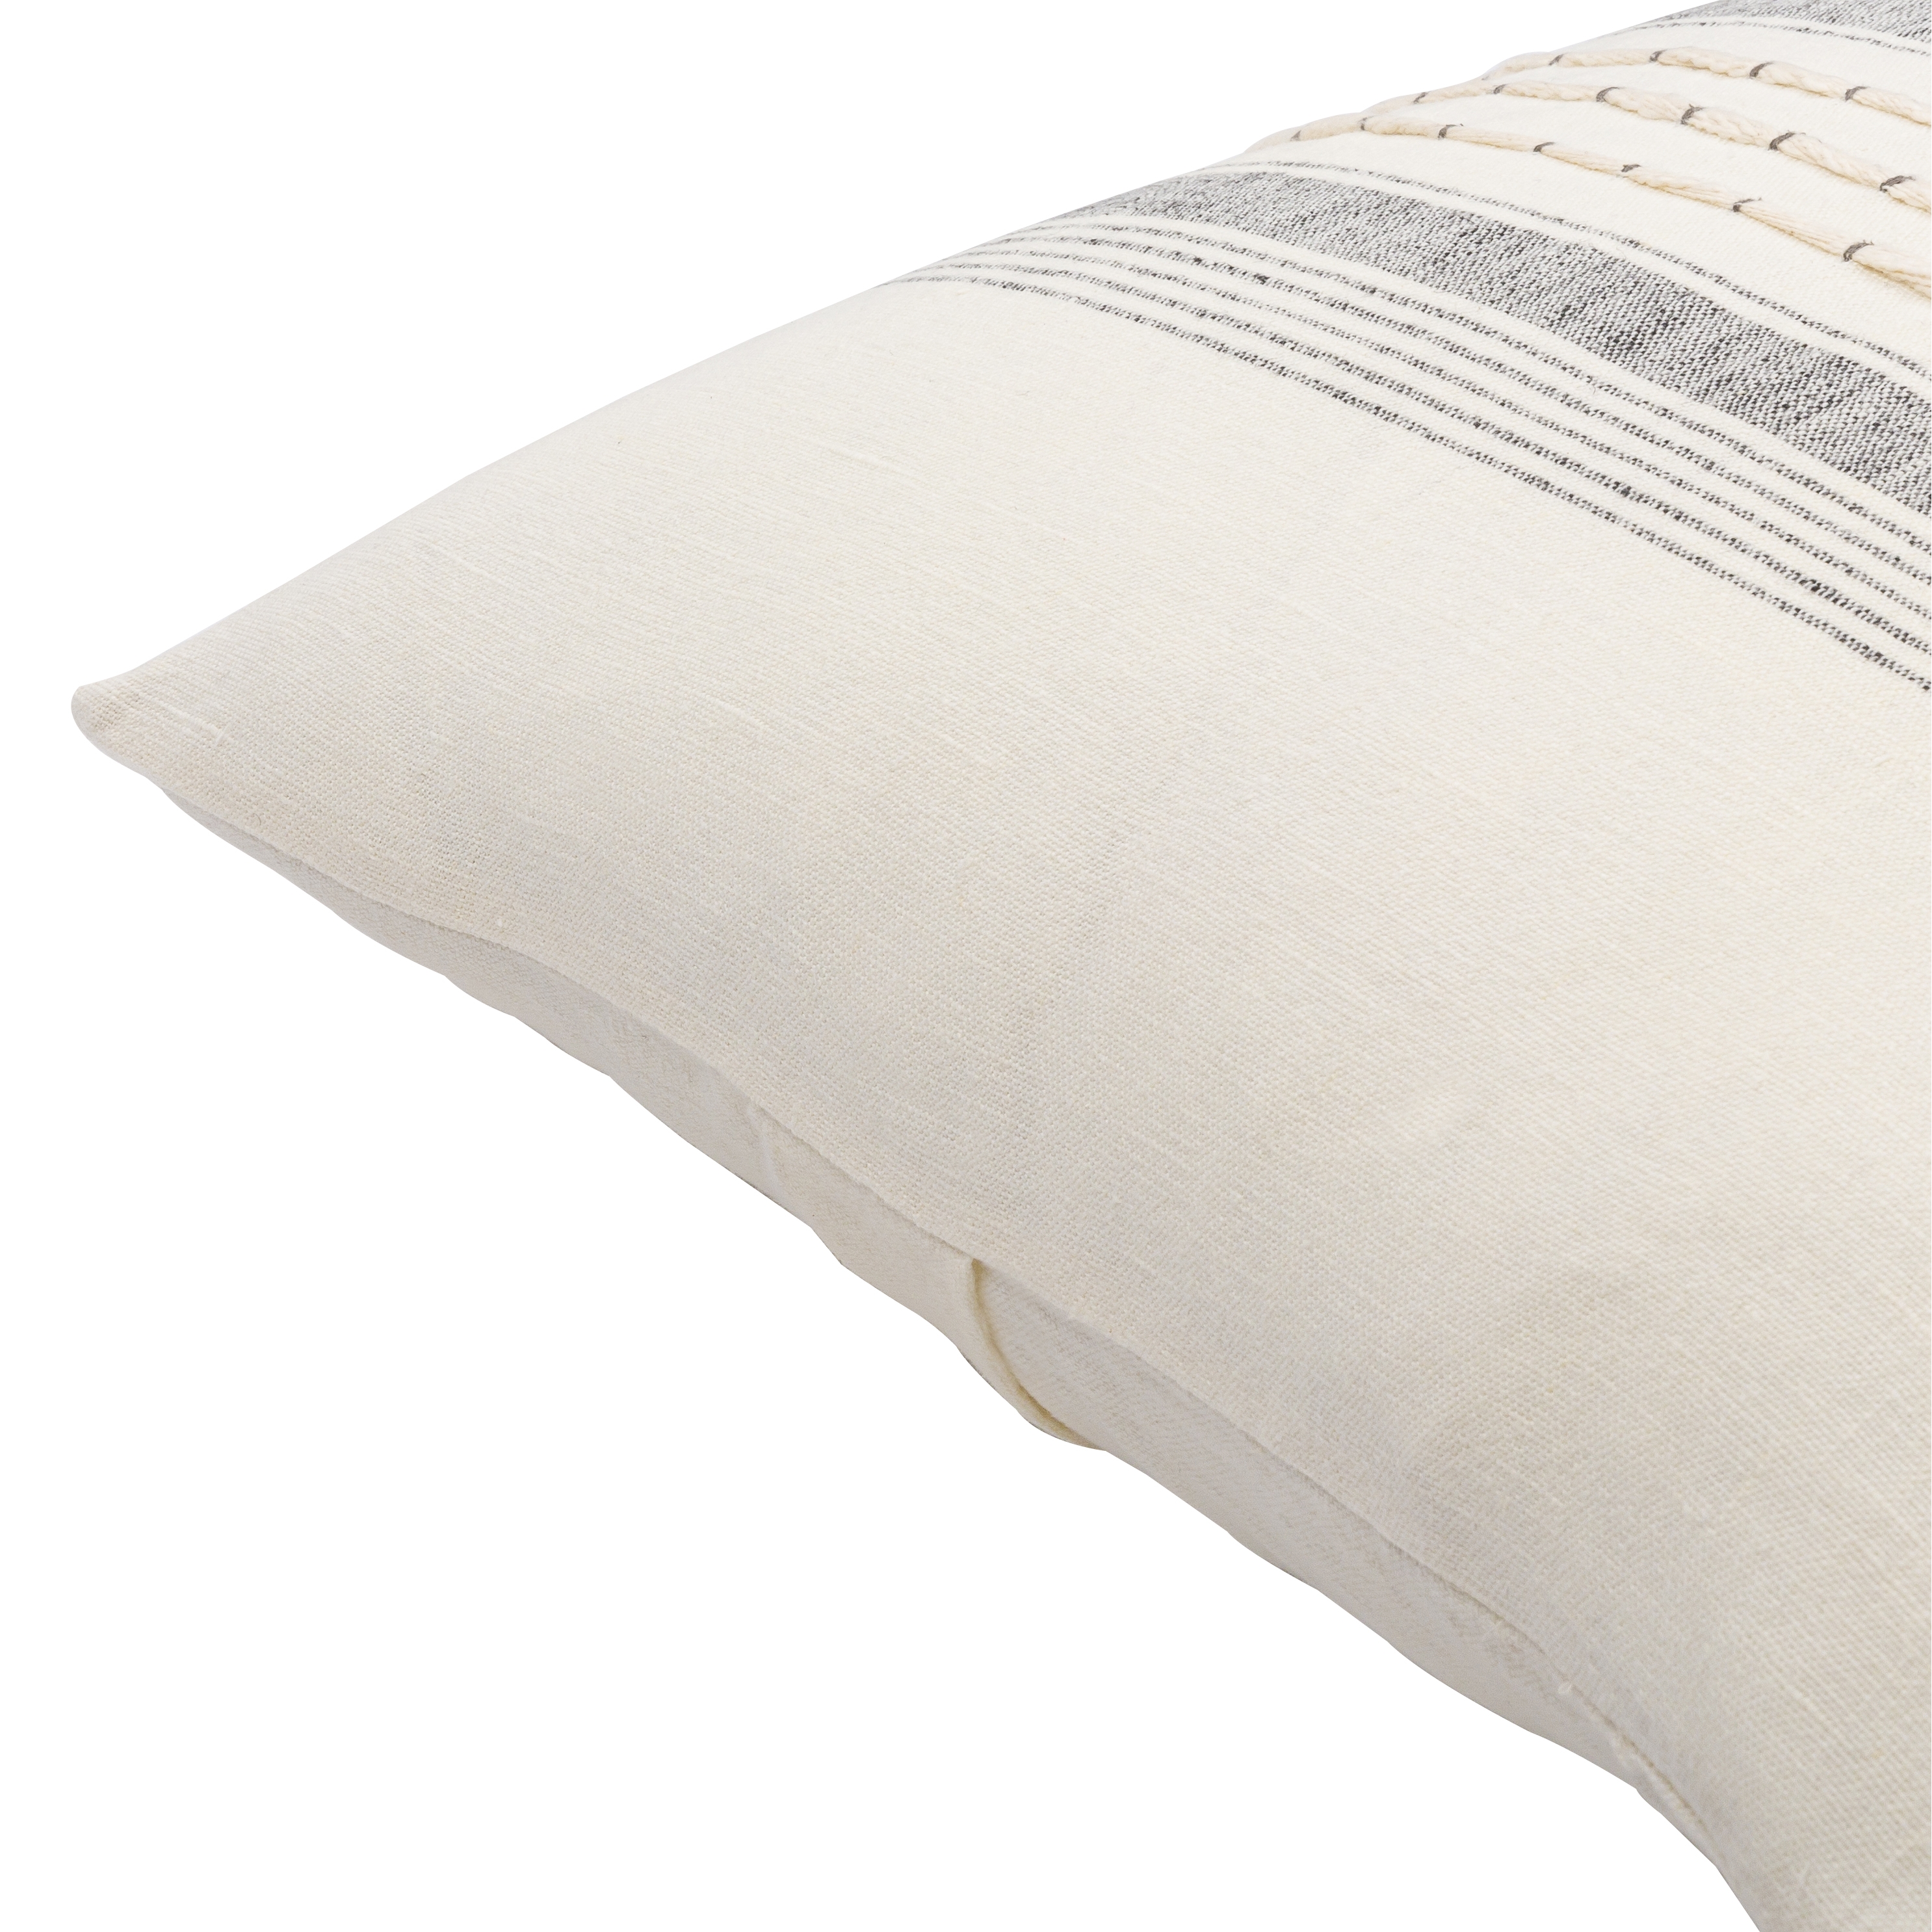 Linen Stripe Embellished Throw Pillow, 18" x 18", pillow cover only - Image 1